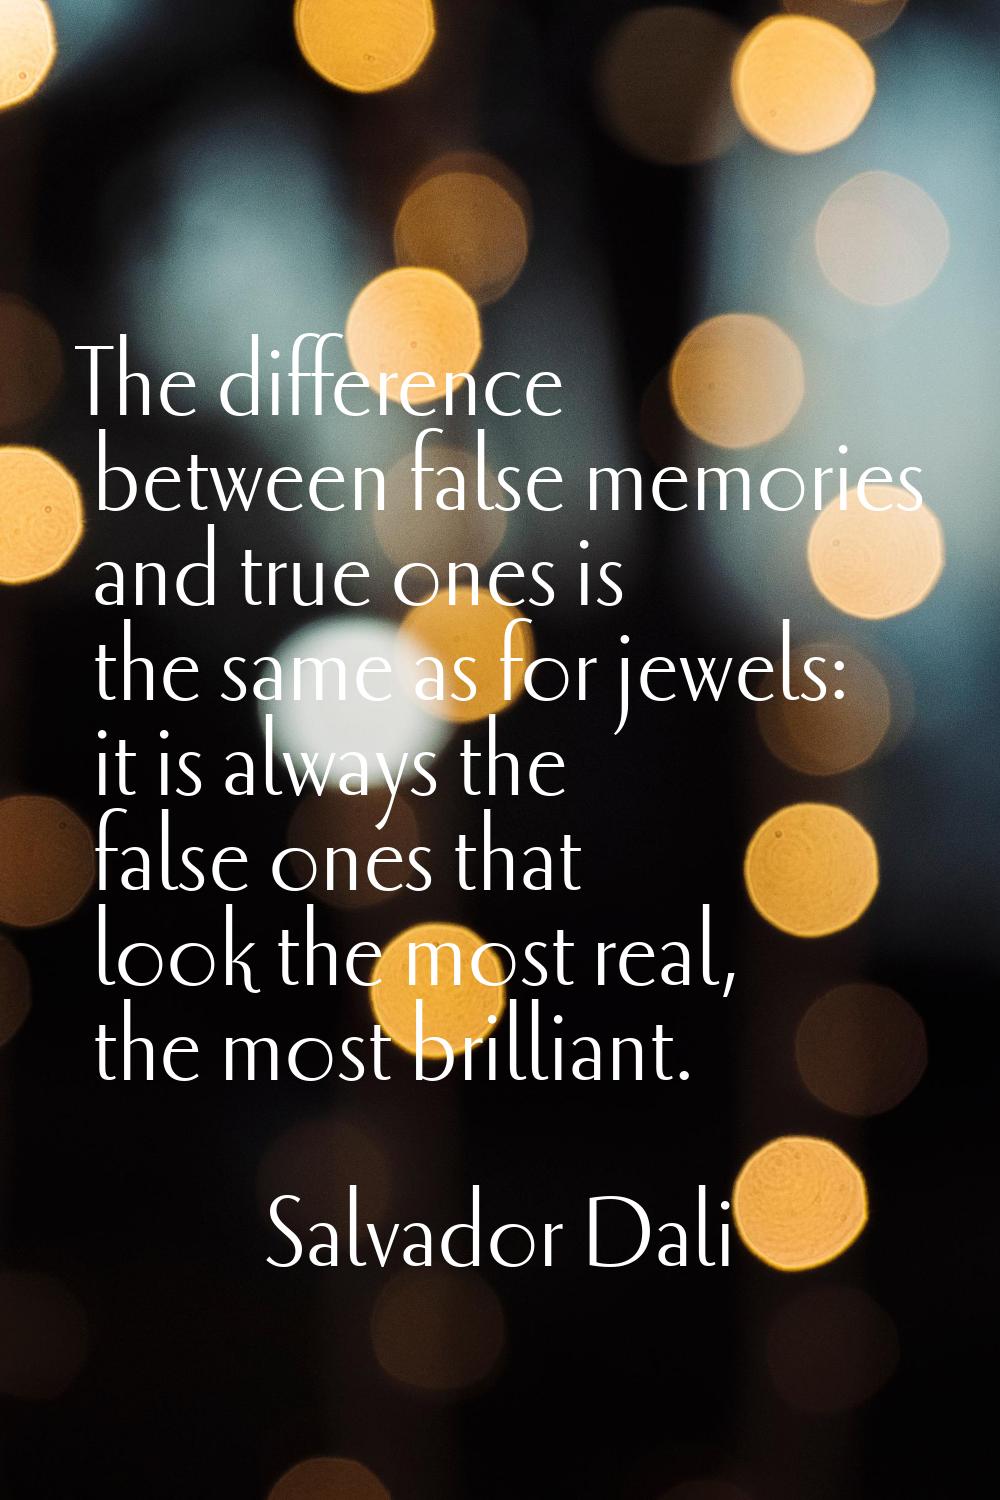 The difference between false memories and true ones is the same as for jewels: it is always the fal